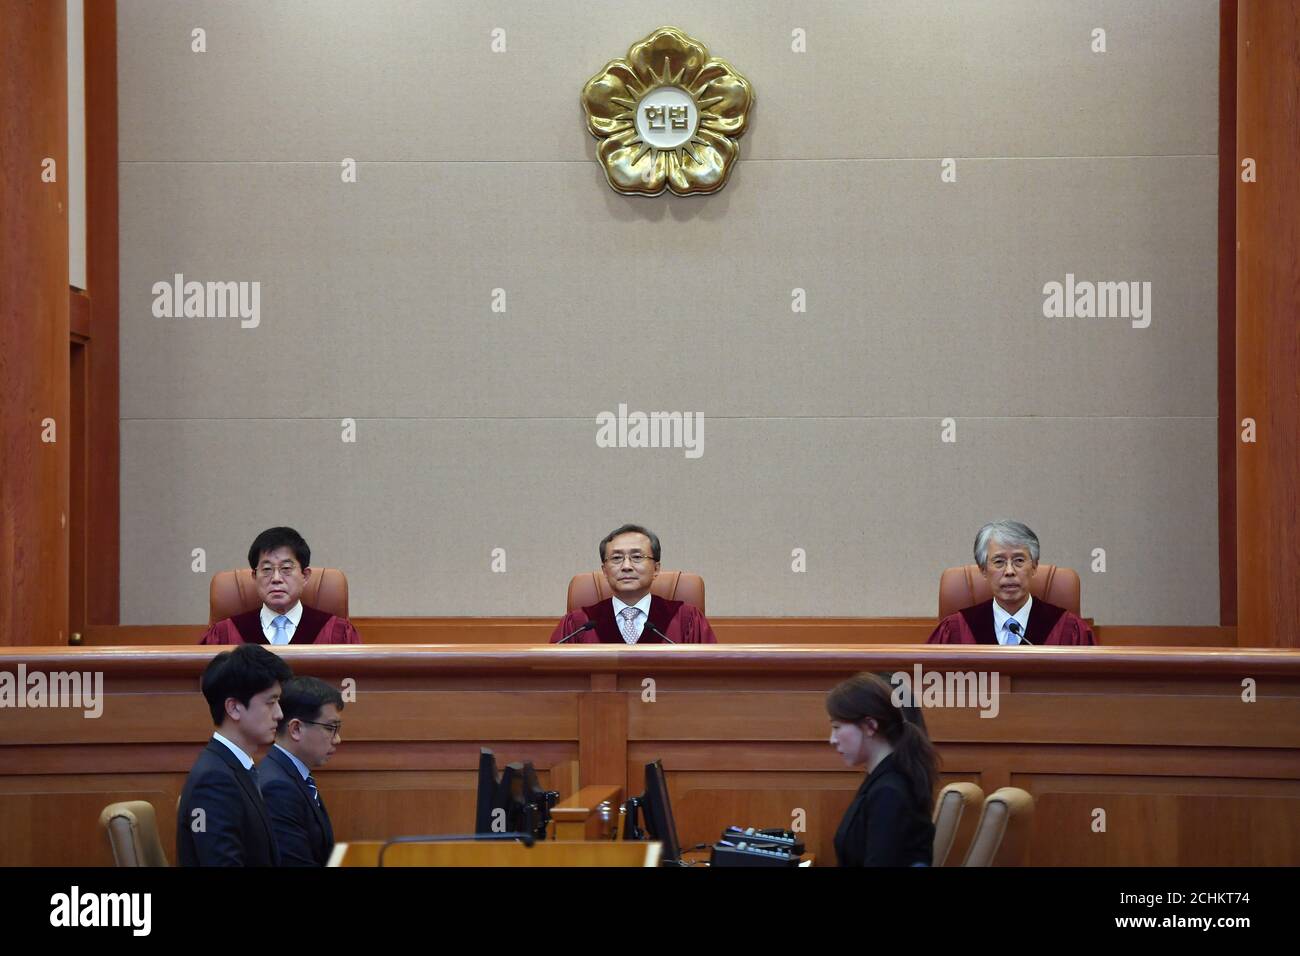 South Korea's Constitutional Court chief judge Yoo Nam-seok and other judges sit for the ruling on decriminalisation of abortion at the court in Seoul, South Korea April 11, 2019. Jung Yeon-je/Pool via REUTERS Stock Photo